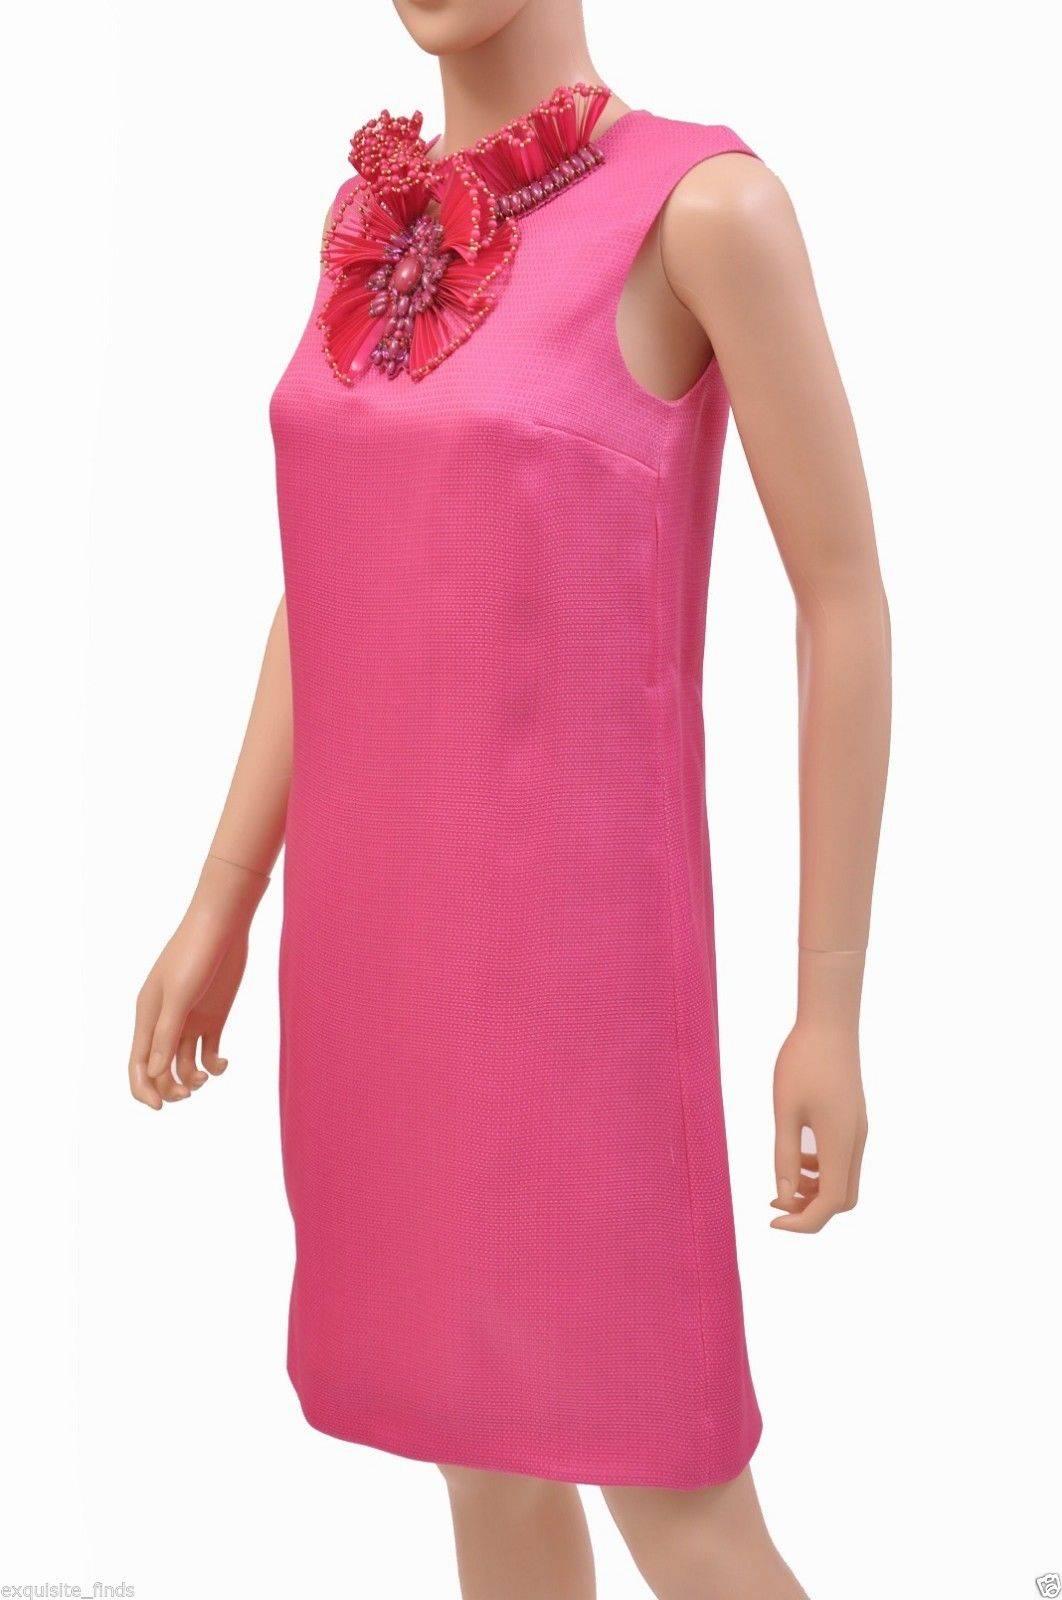 Women's New GUCCI HOT PINK RAFFIA DRESS with FLORAL EMBROIDERY